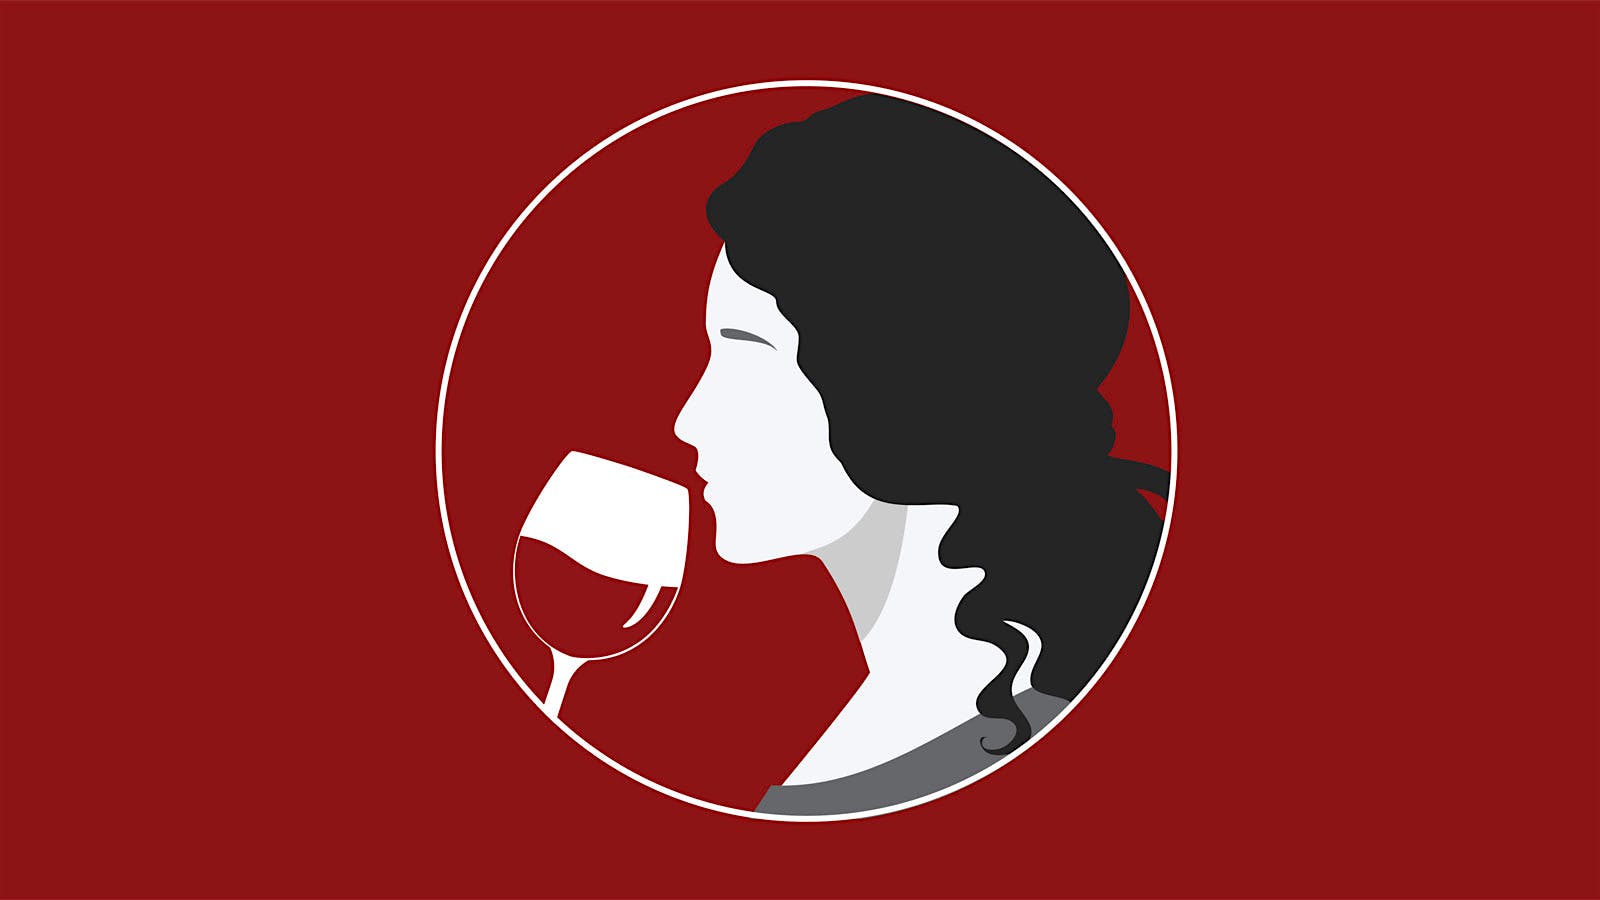 Is it safe to consume wine while breastfeeding?